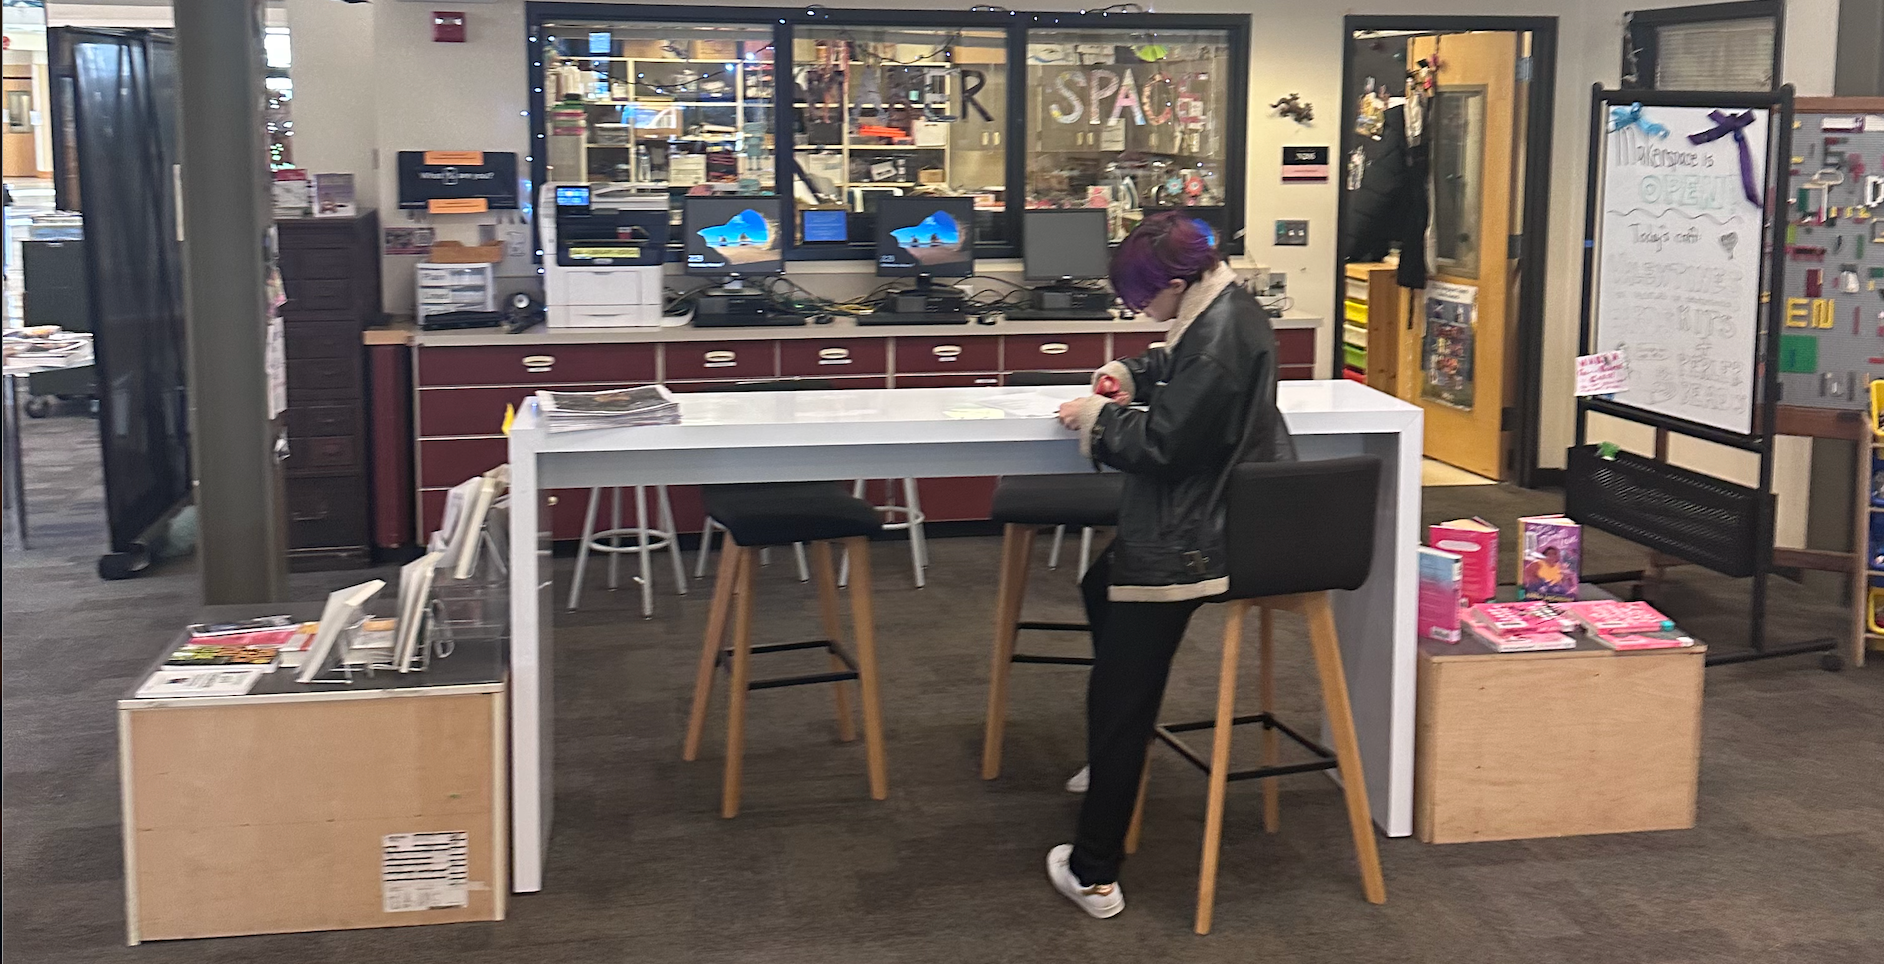 Student working at a table in the library.